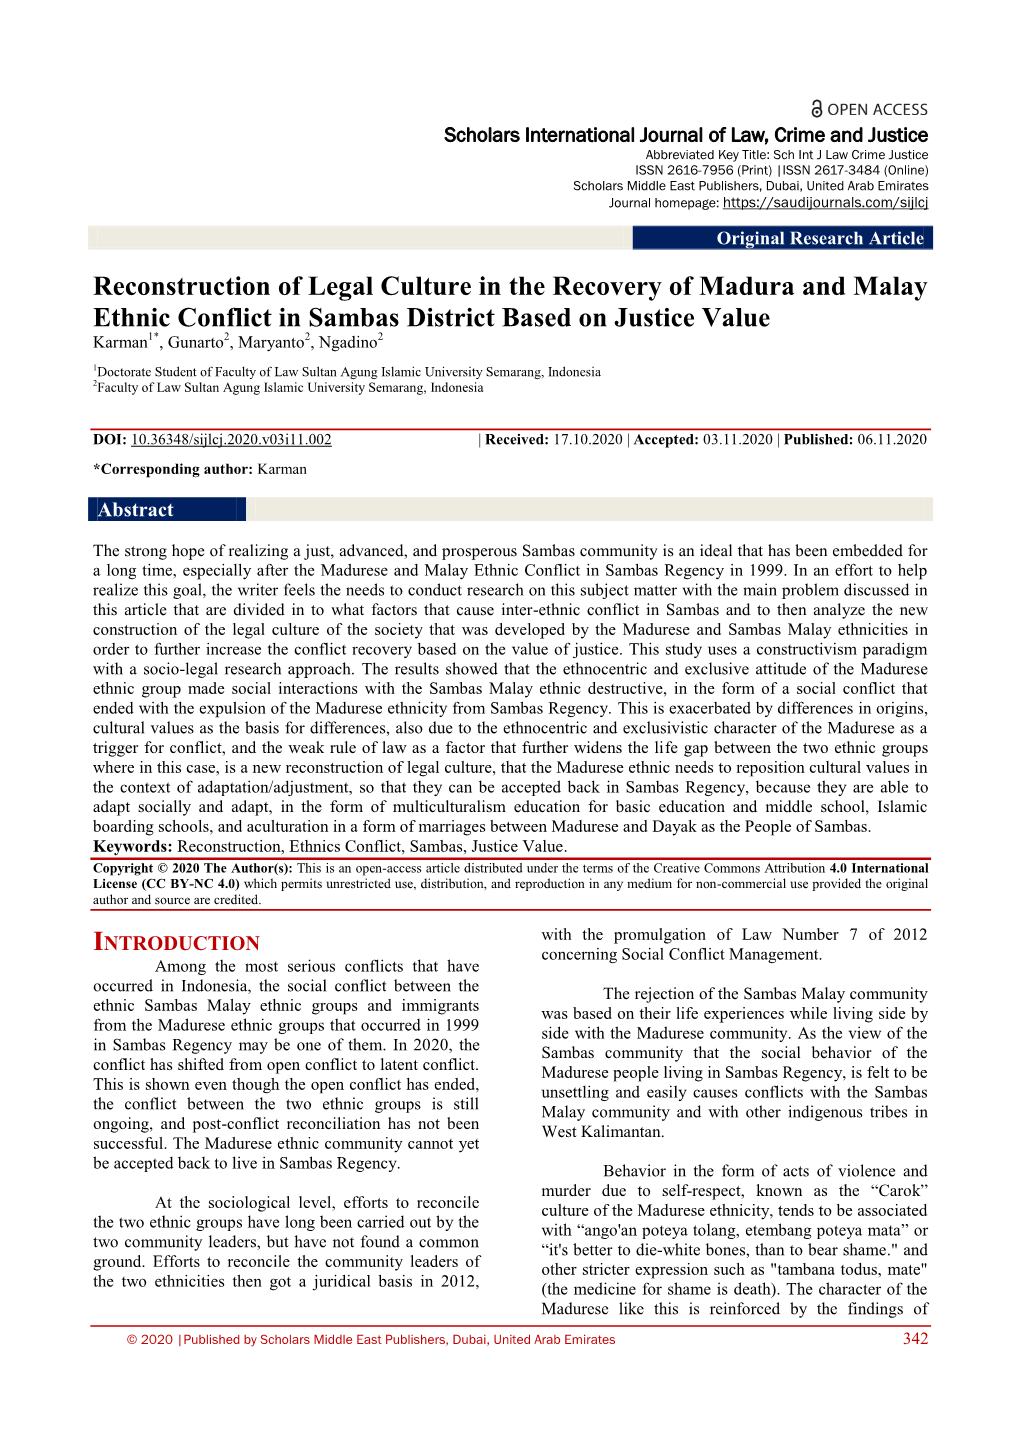 Reconstruction of Legal Culture in the Recovery of Madura and Malay Ethnic Conflict in Sambas District Based on Justice Value Karman1*, Gunarto2, Maryanto2, Ngadino2